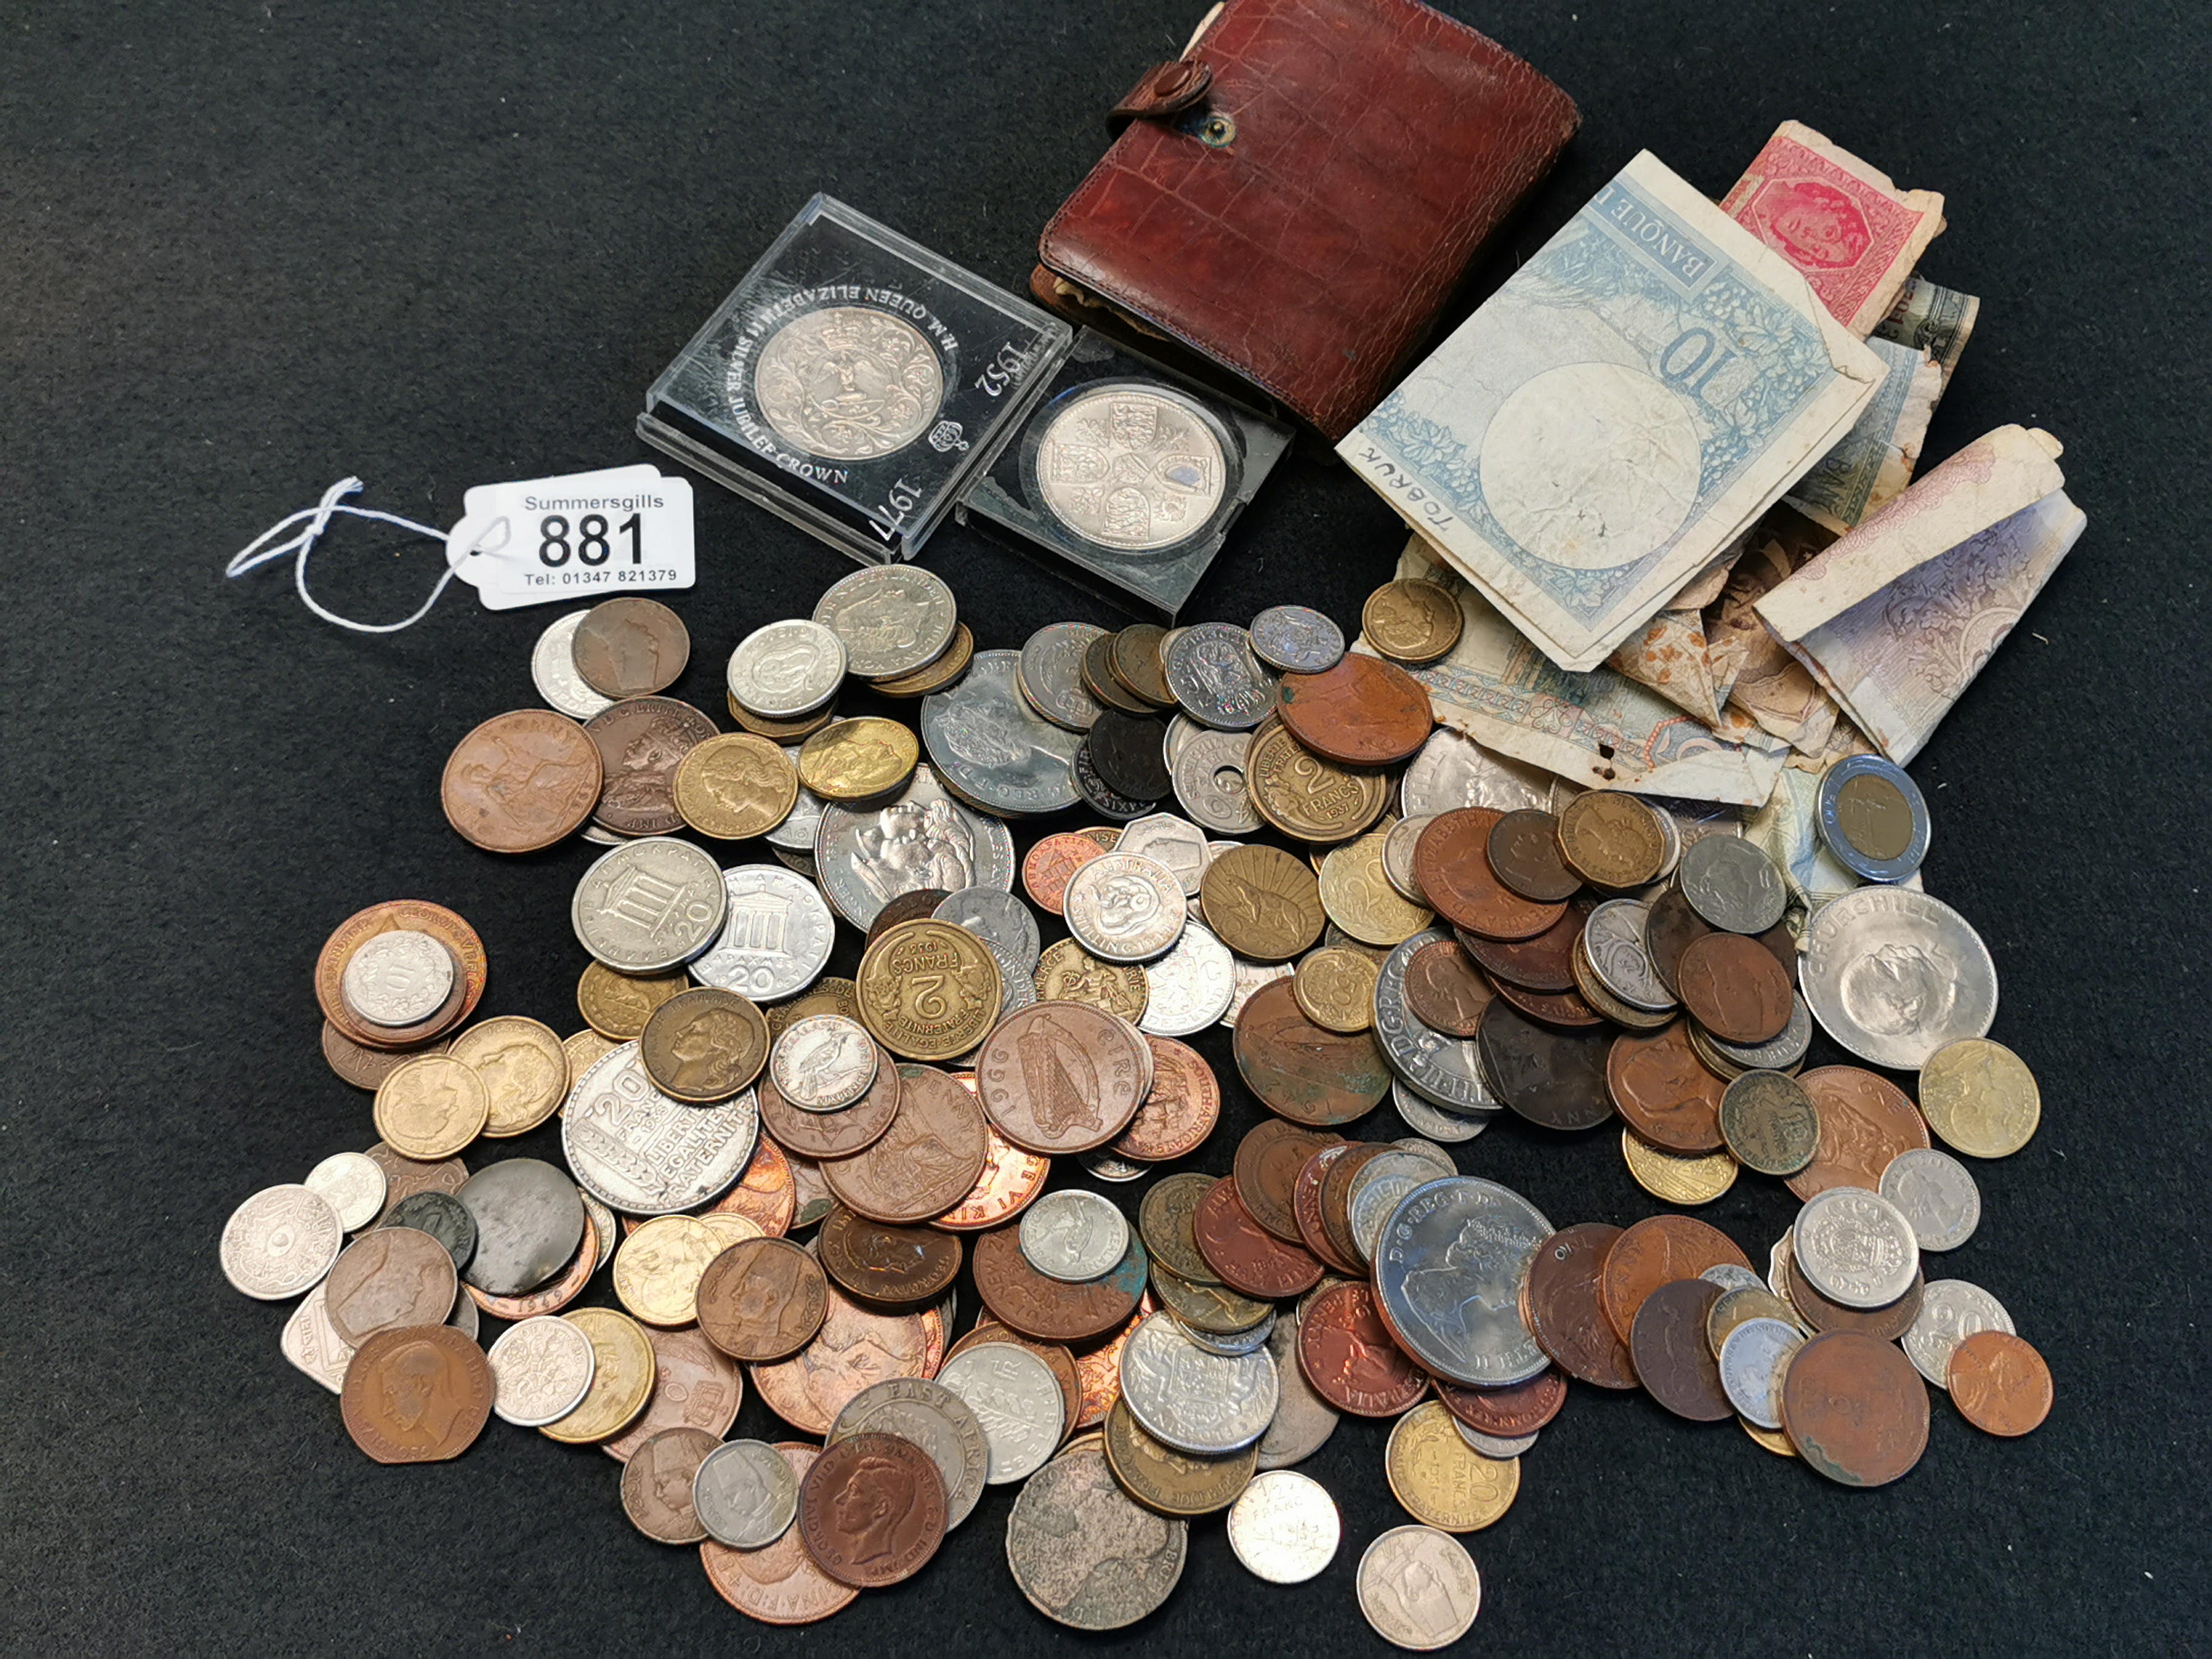 Box of Miscelleanous Coins & Banknotes